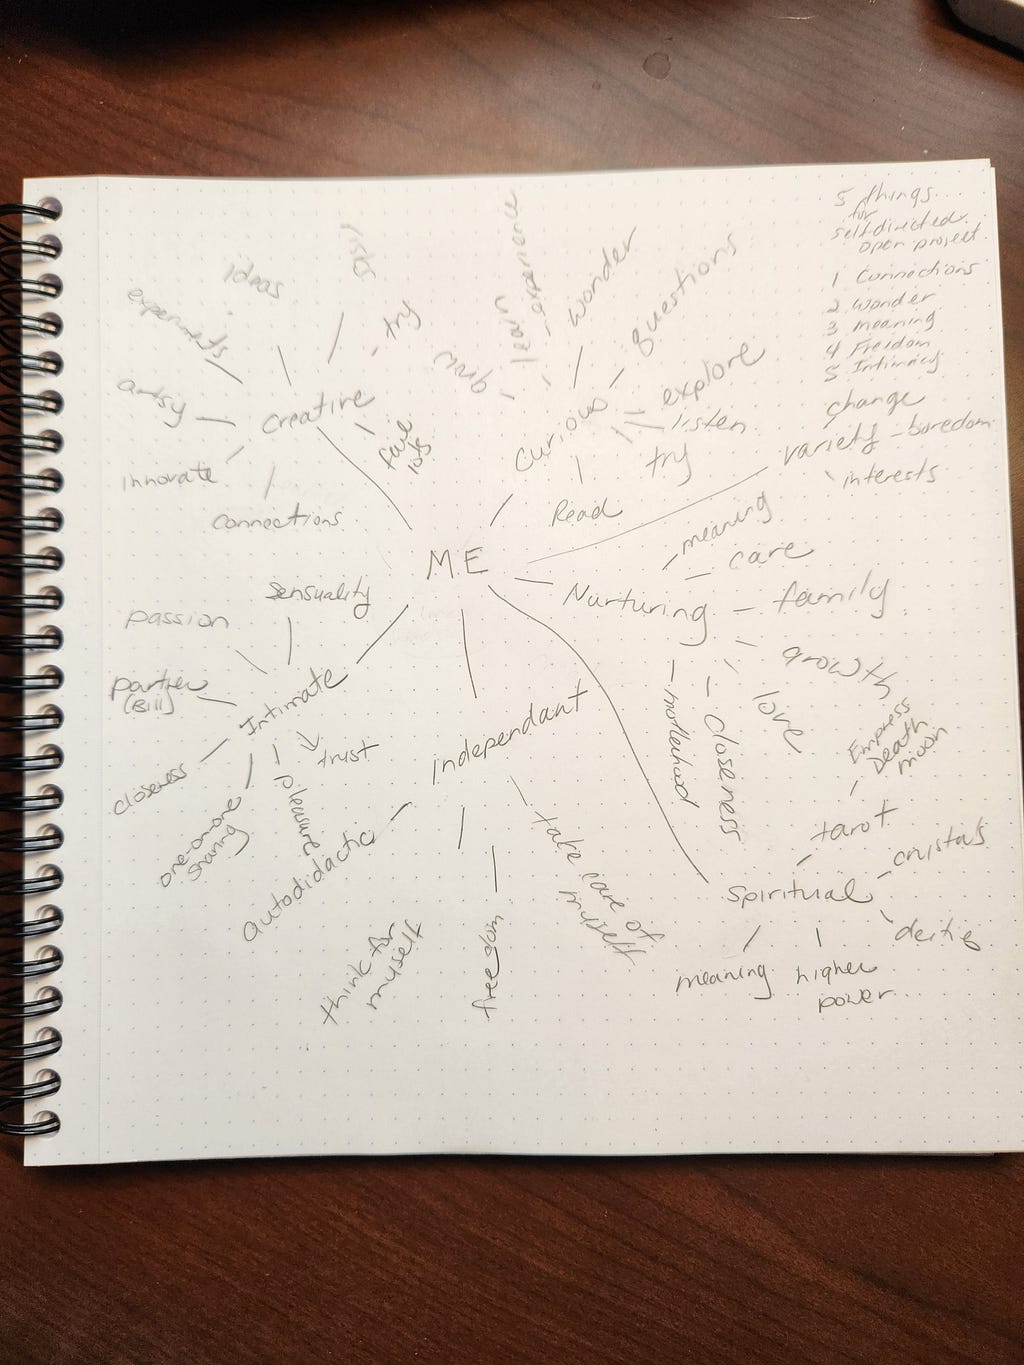 A written mind map about me.